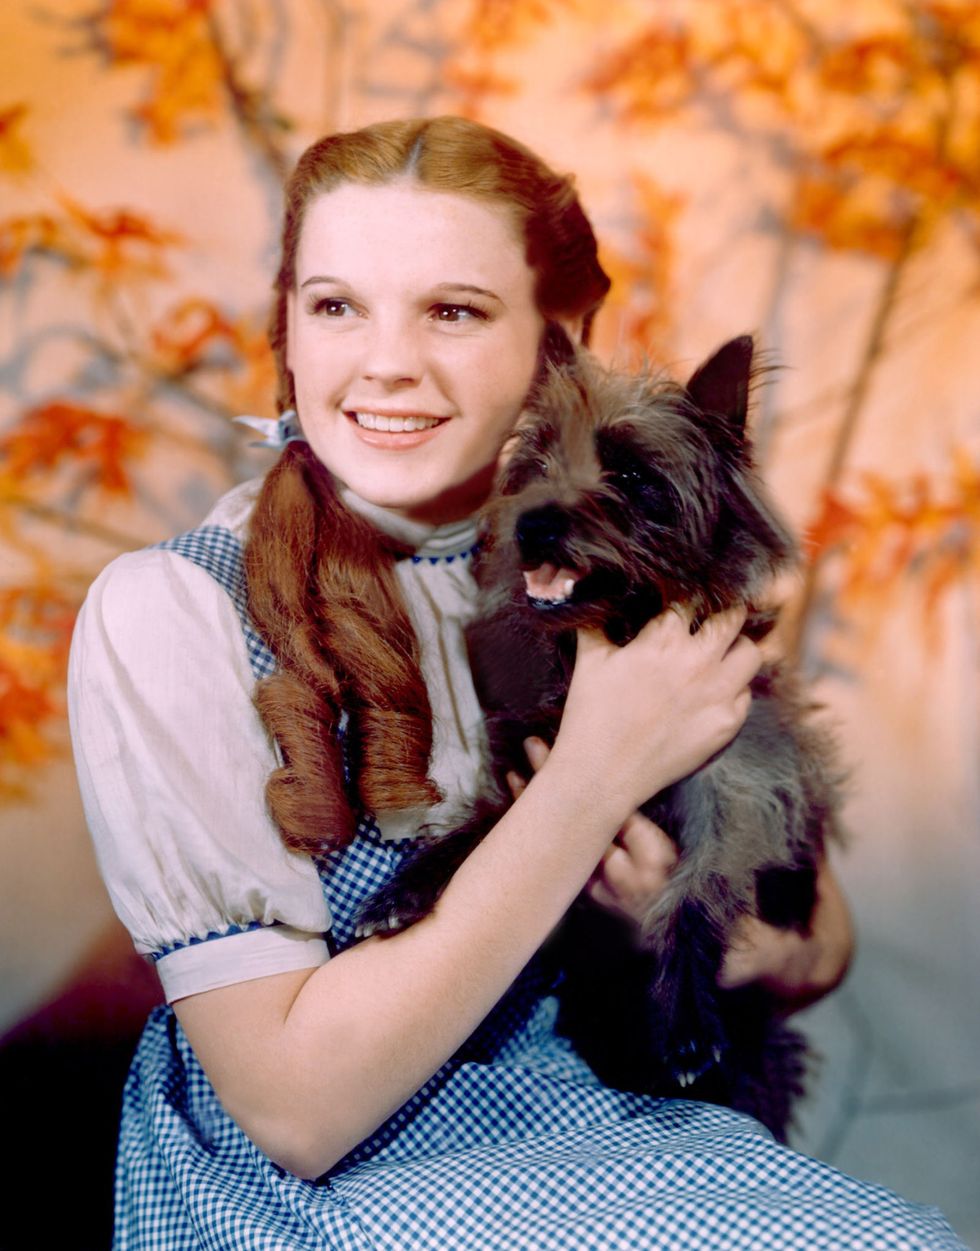 <p>Judy Garland's pigtails in <em data-redactor-tag="em" data-verified="redactor">The Wizard of Oz </em>were iconic for more than one reason: they often changed length scene after scene. You could call it movie magic.&nbsp;</p>